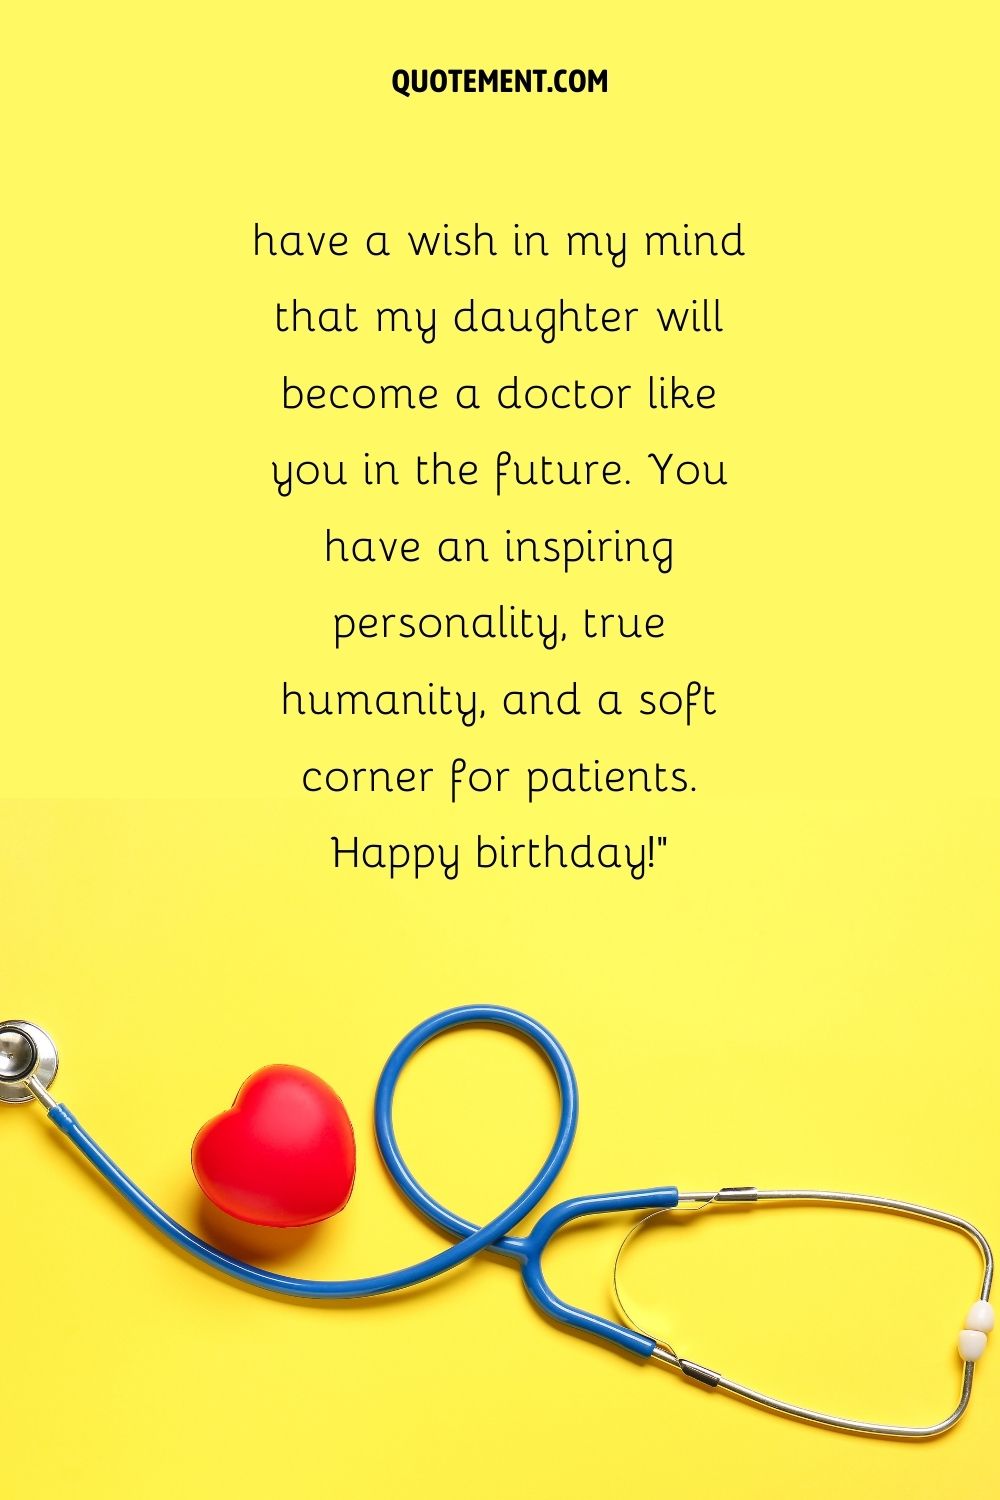 blue stethoscope on a yellow background representing happy birthday doctor